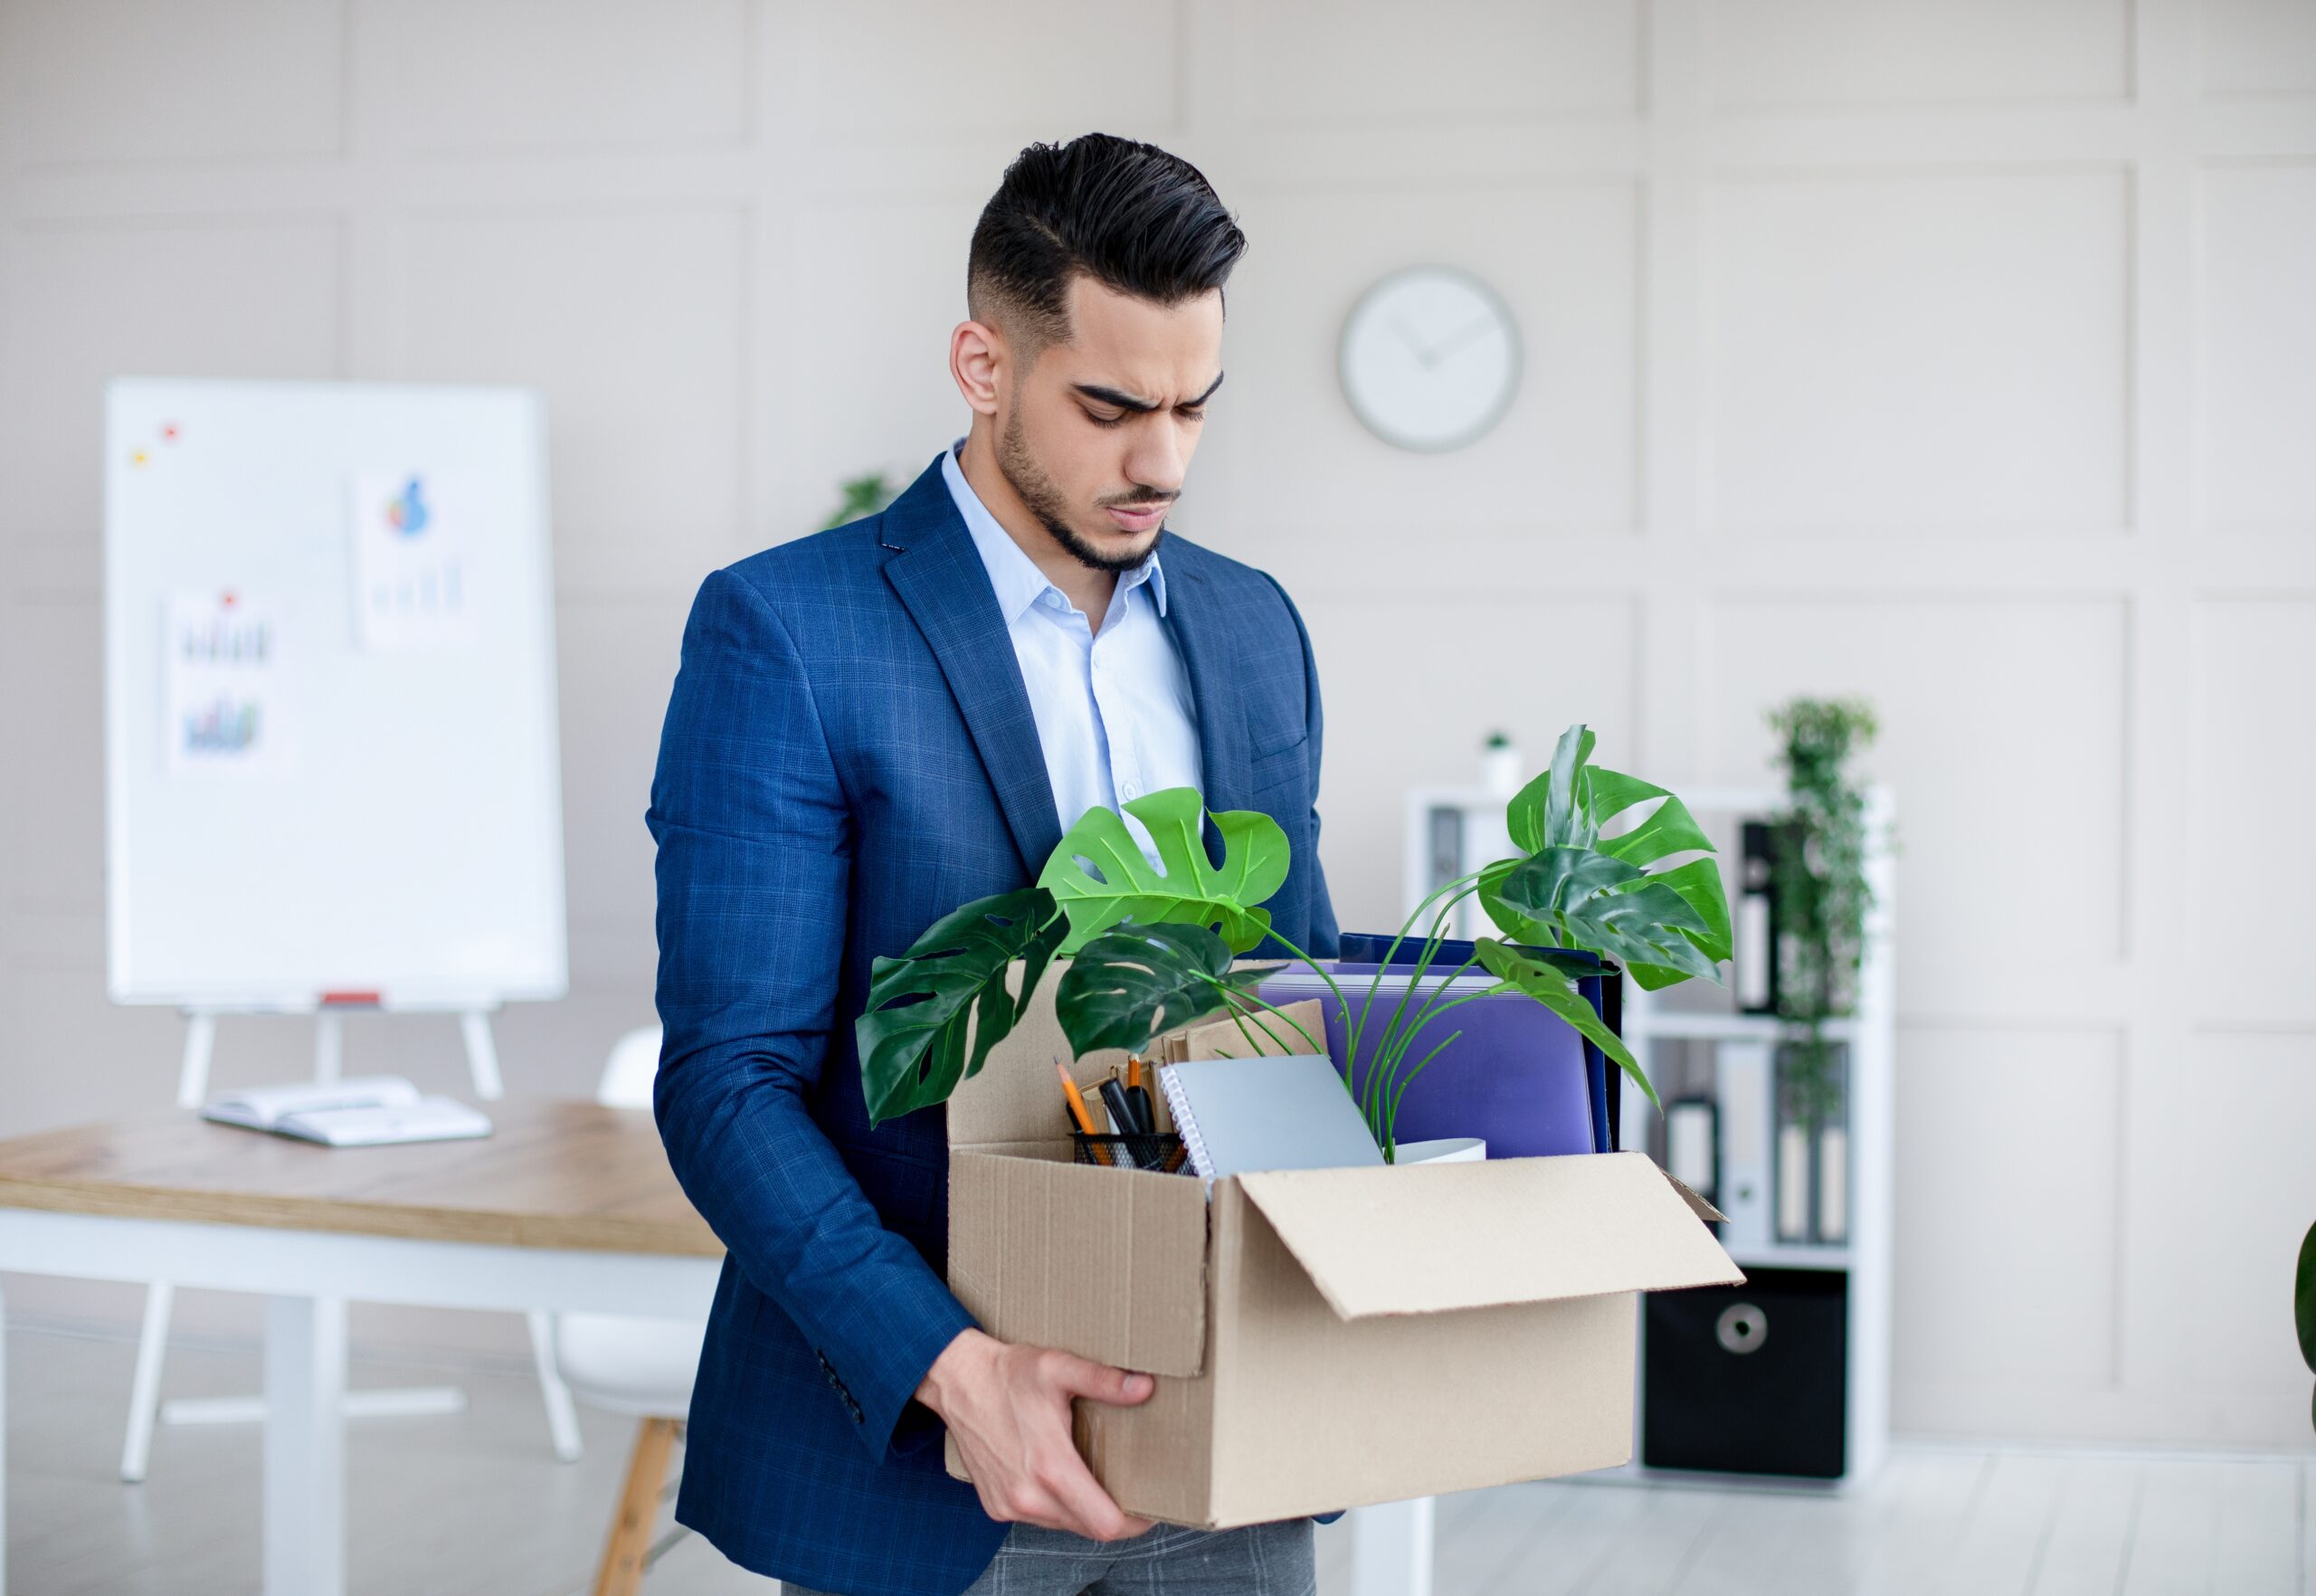 Male employee holds a box of office items after being wrongfully terminated.